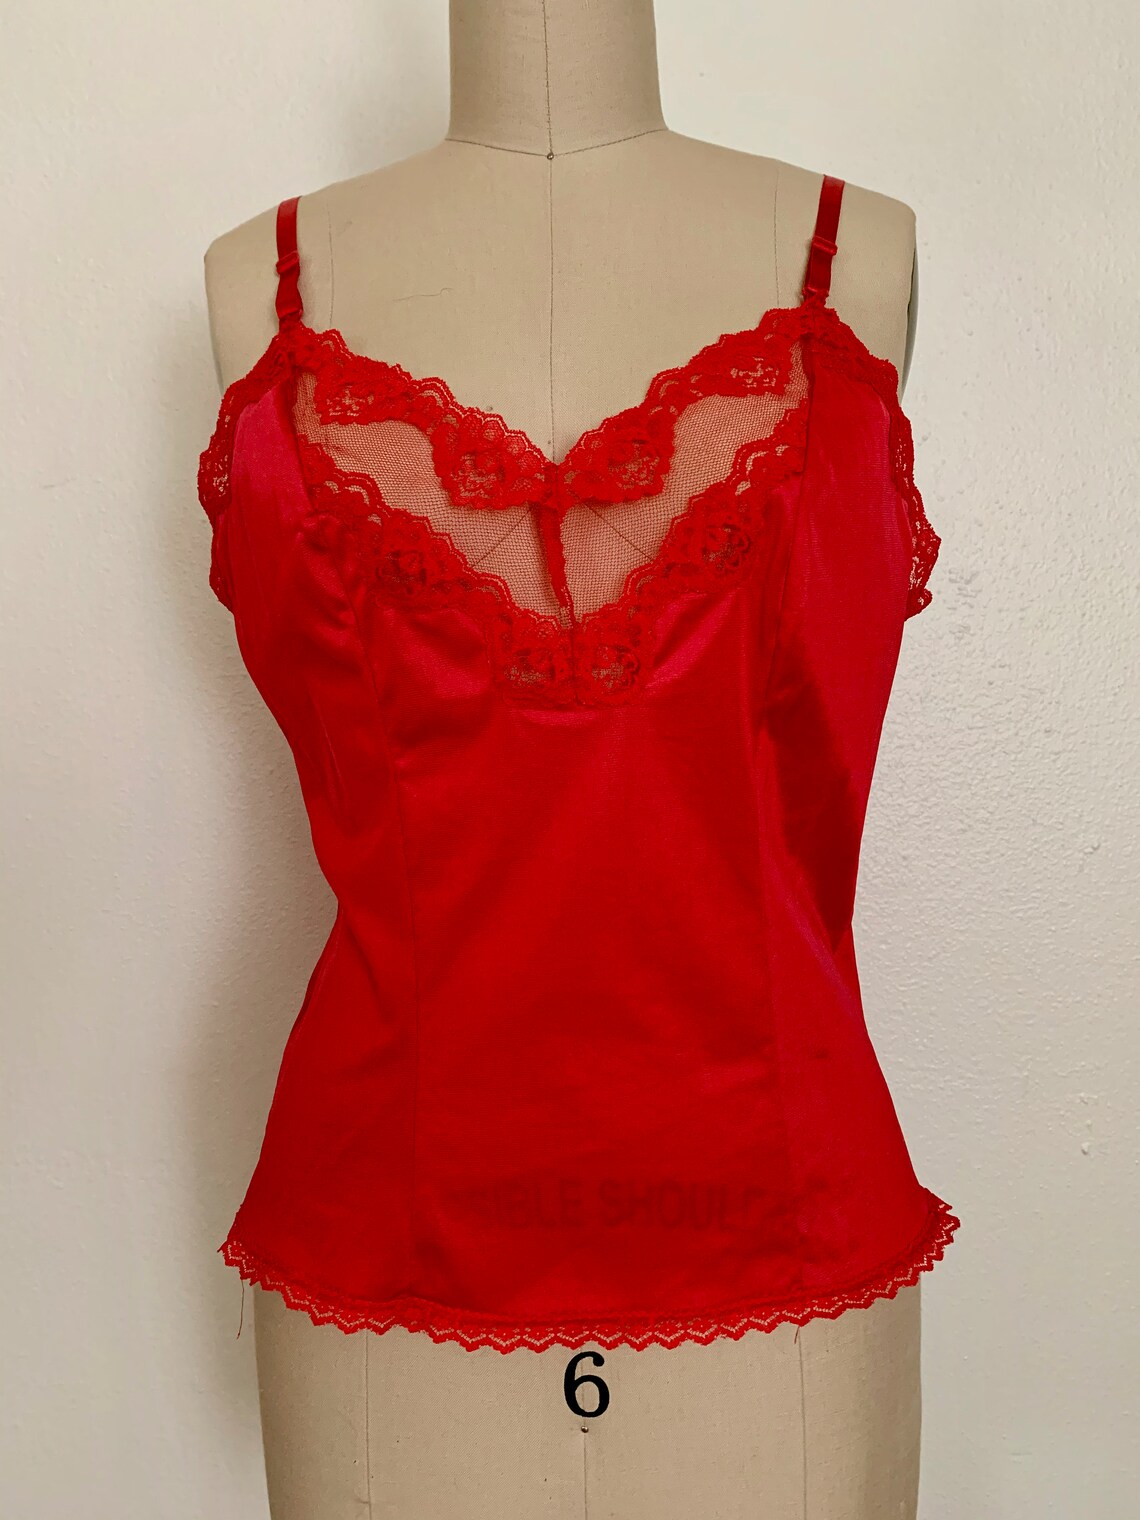 Vintage 80s Red Silky Camisole sz M / L / 1980s Slip Top w | Etsy